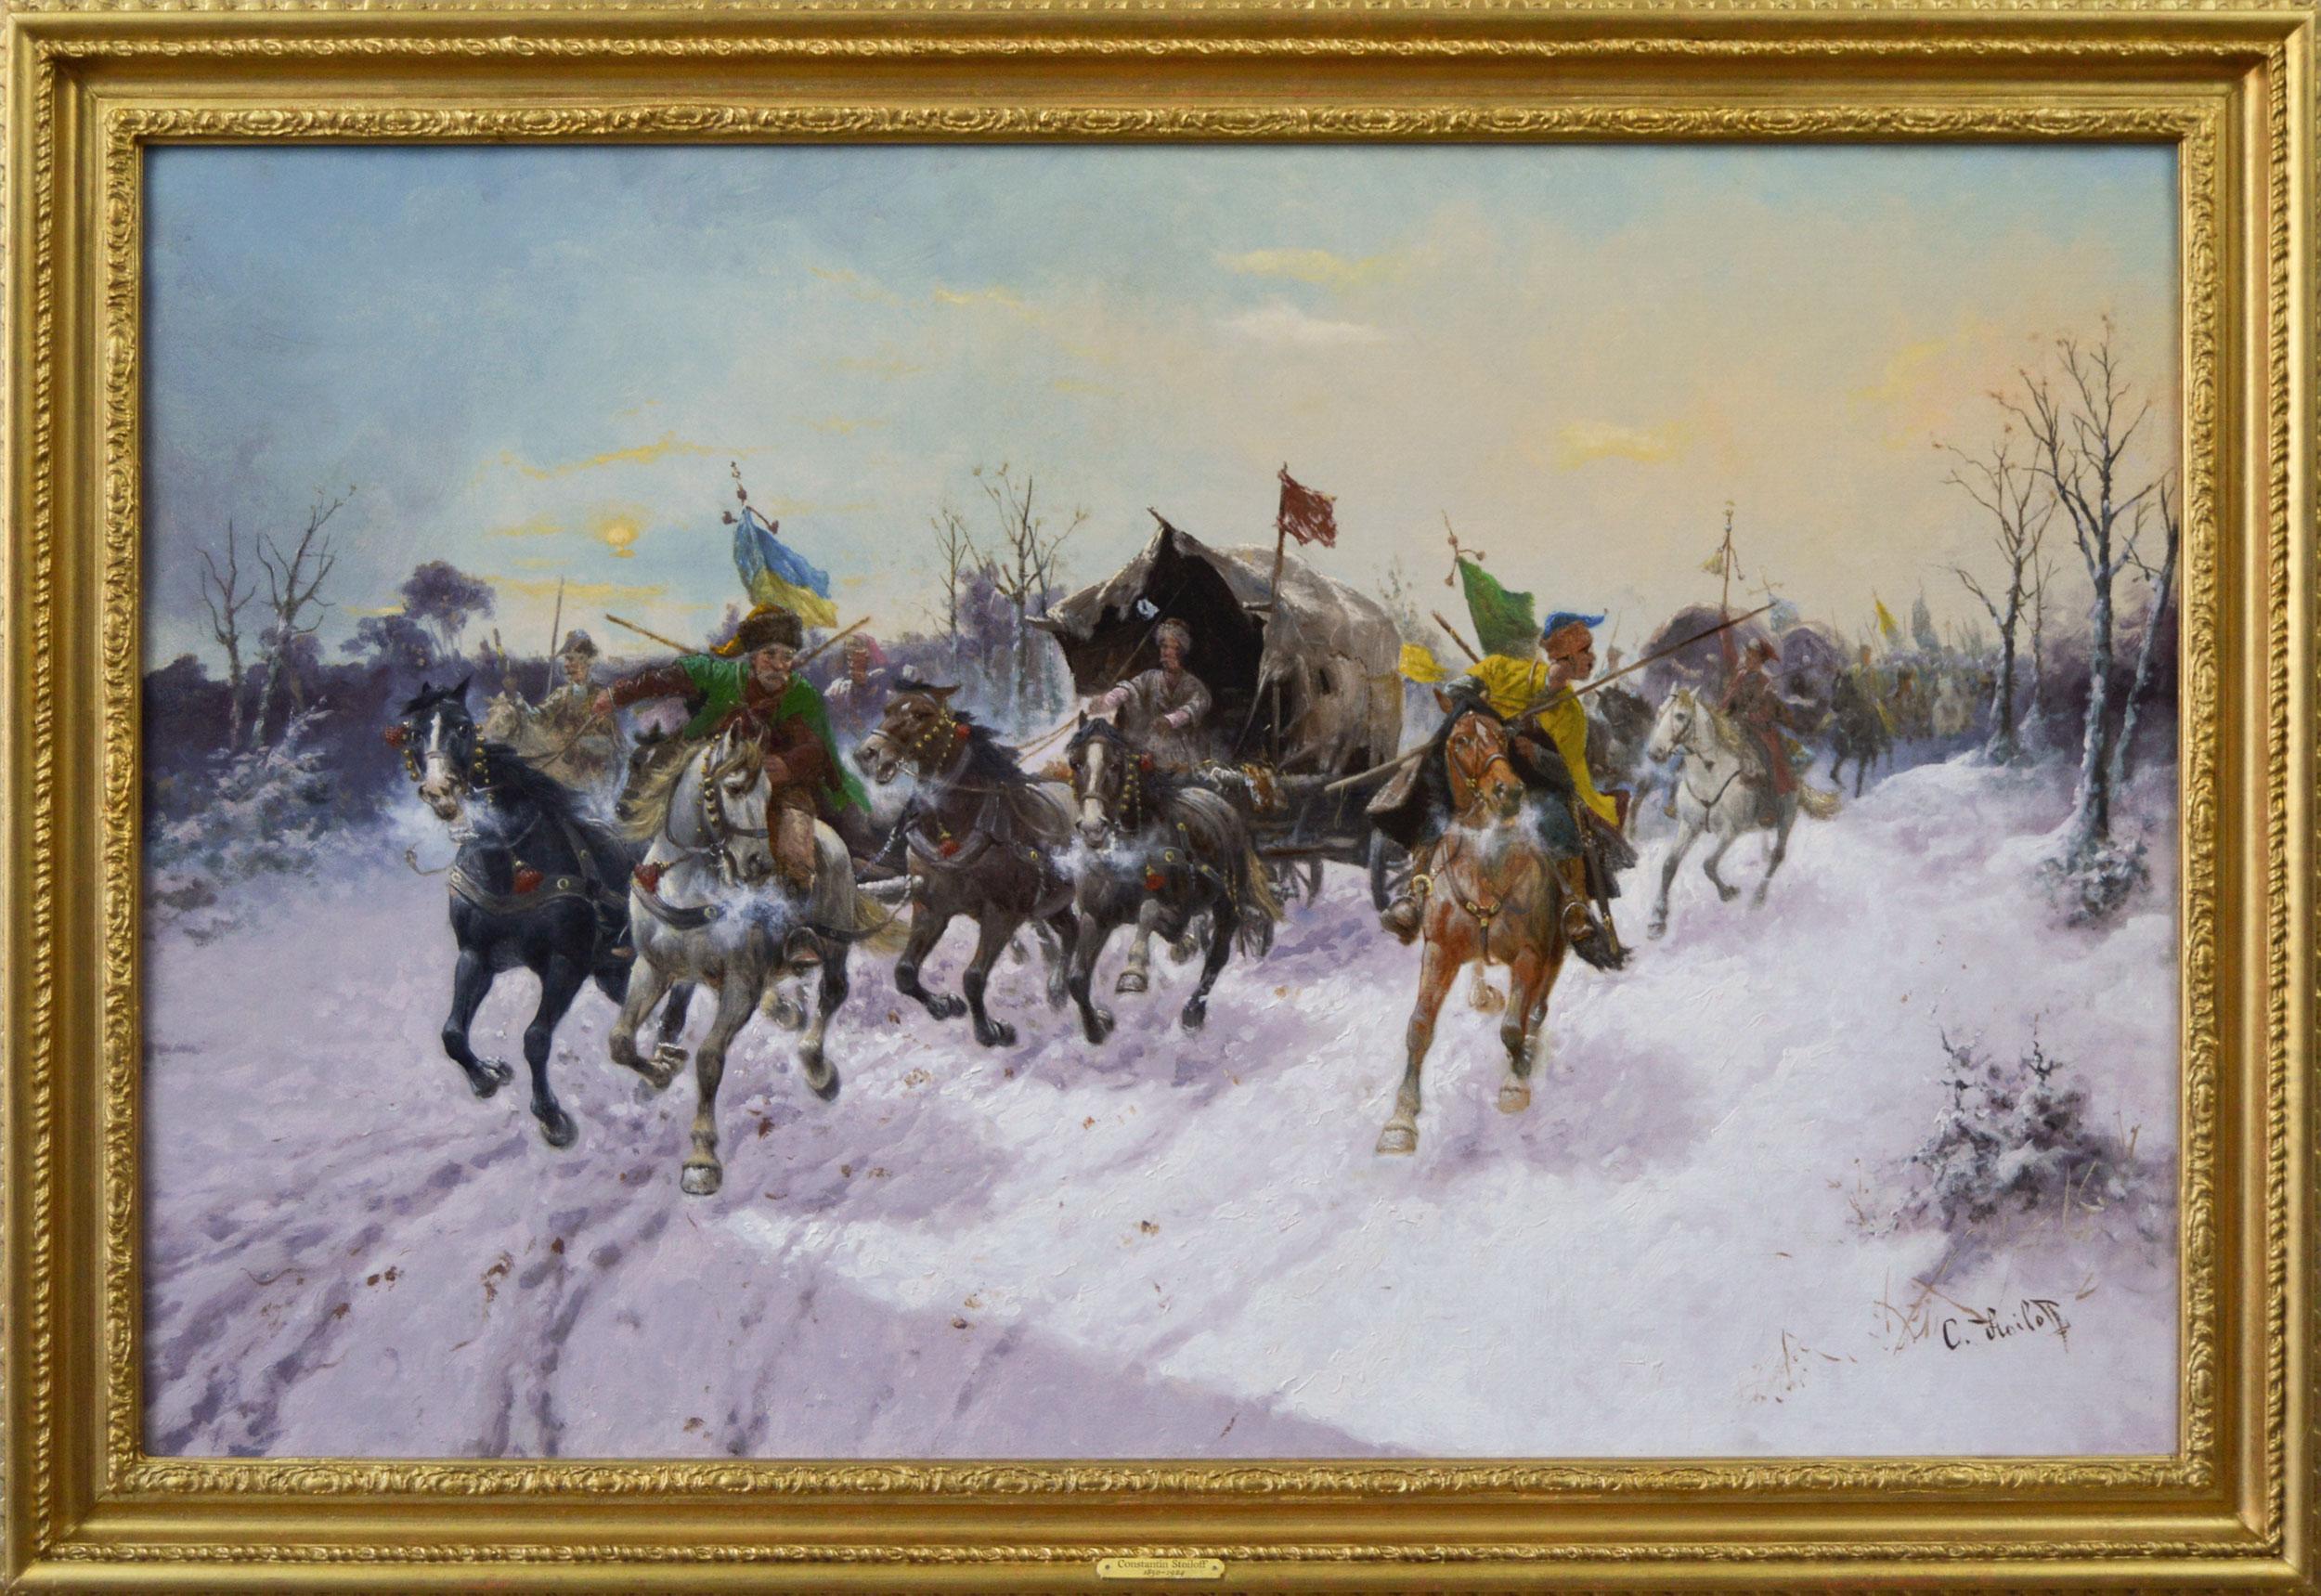 19th Century winter landscape oil painting of a caravan with Cossacks on horses